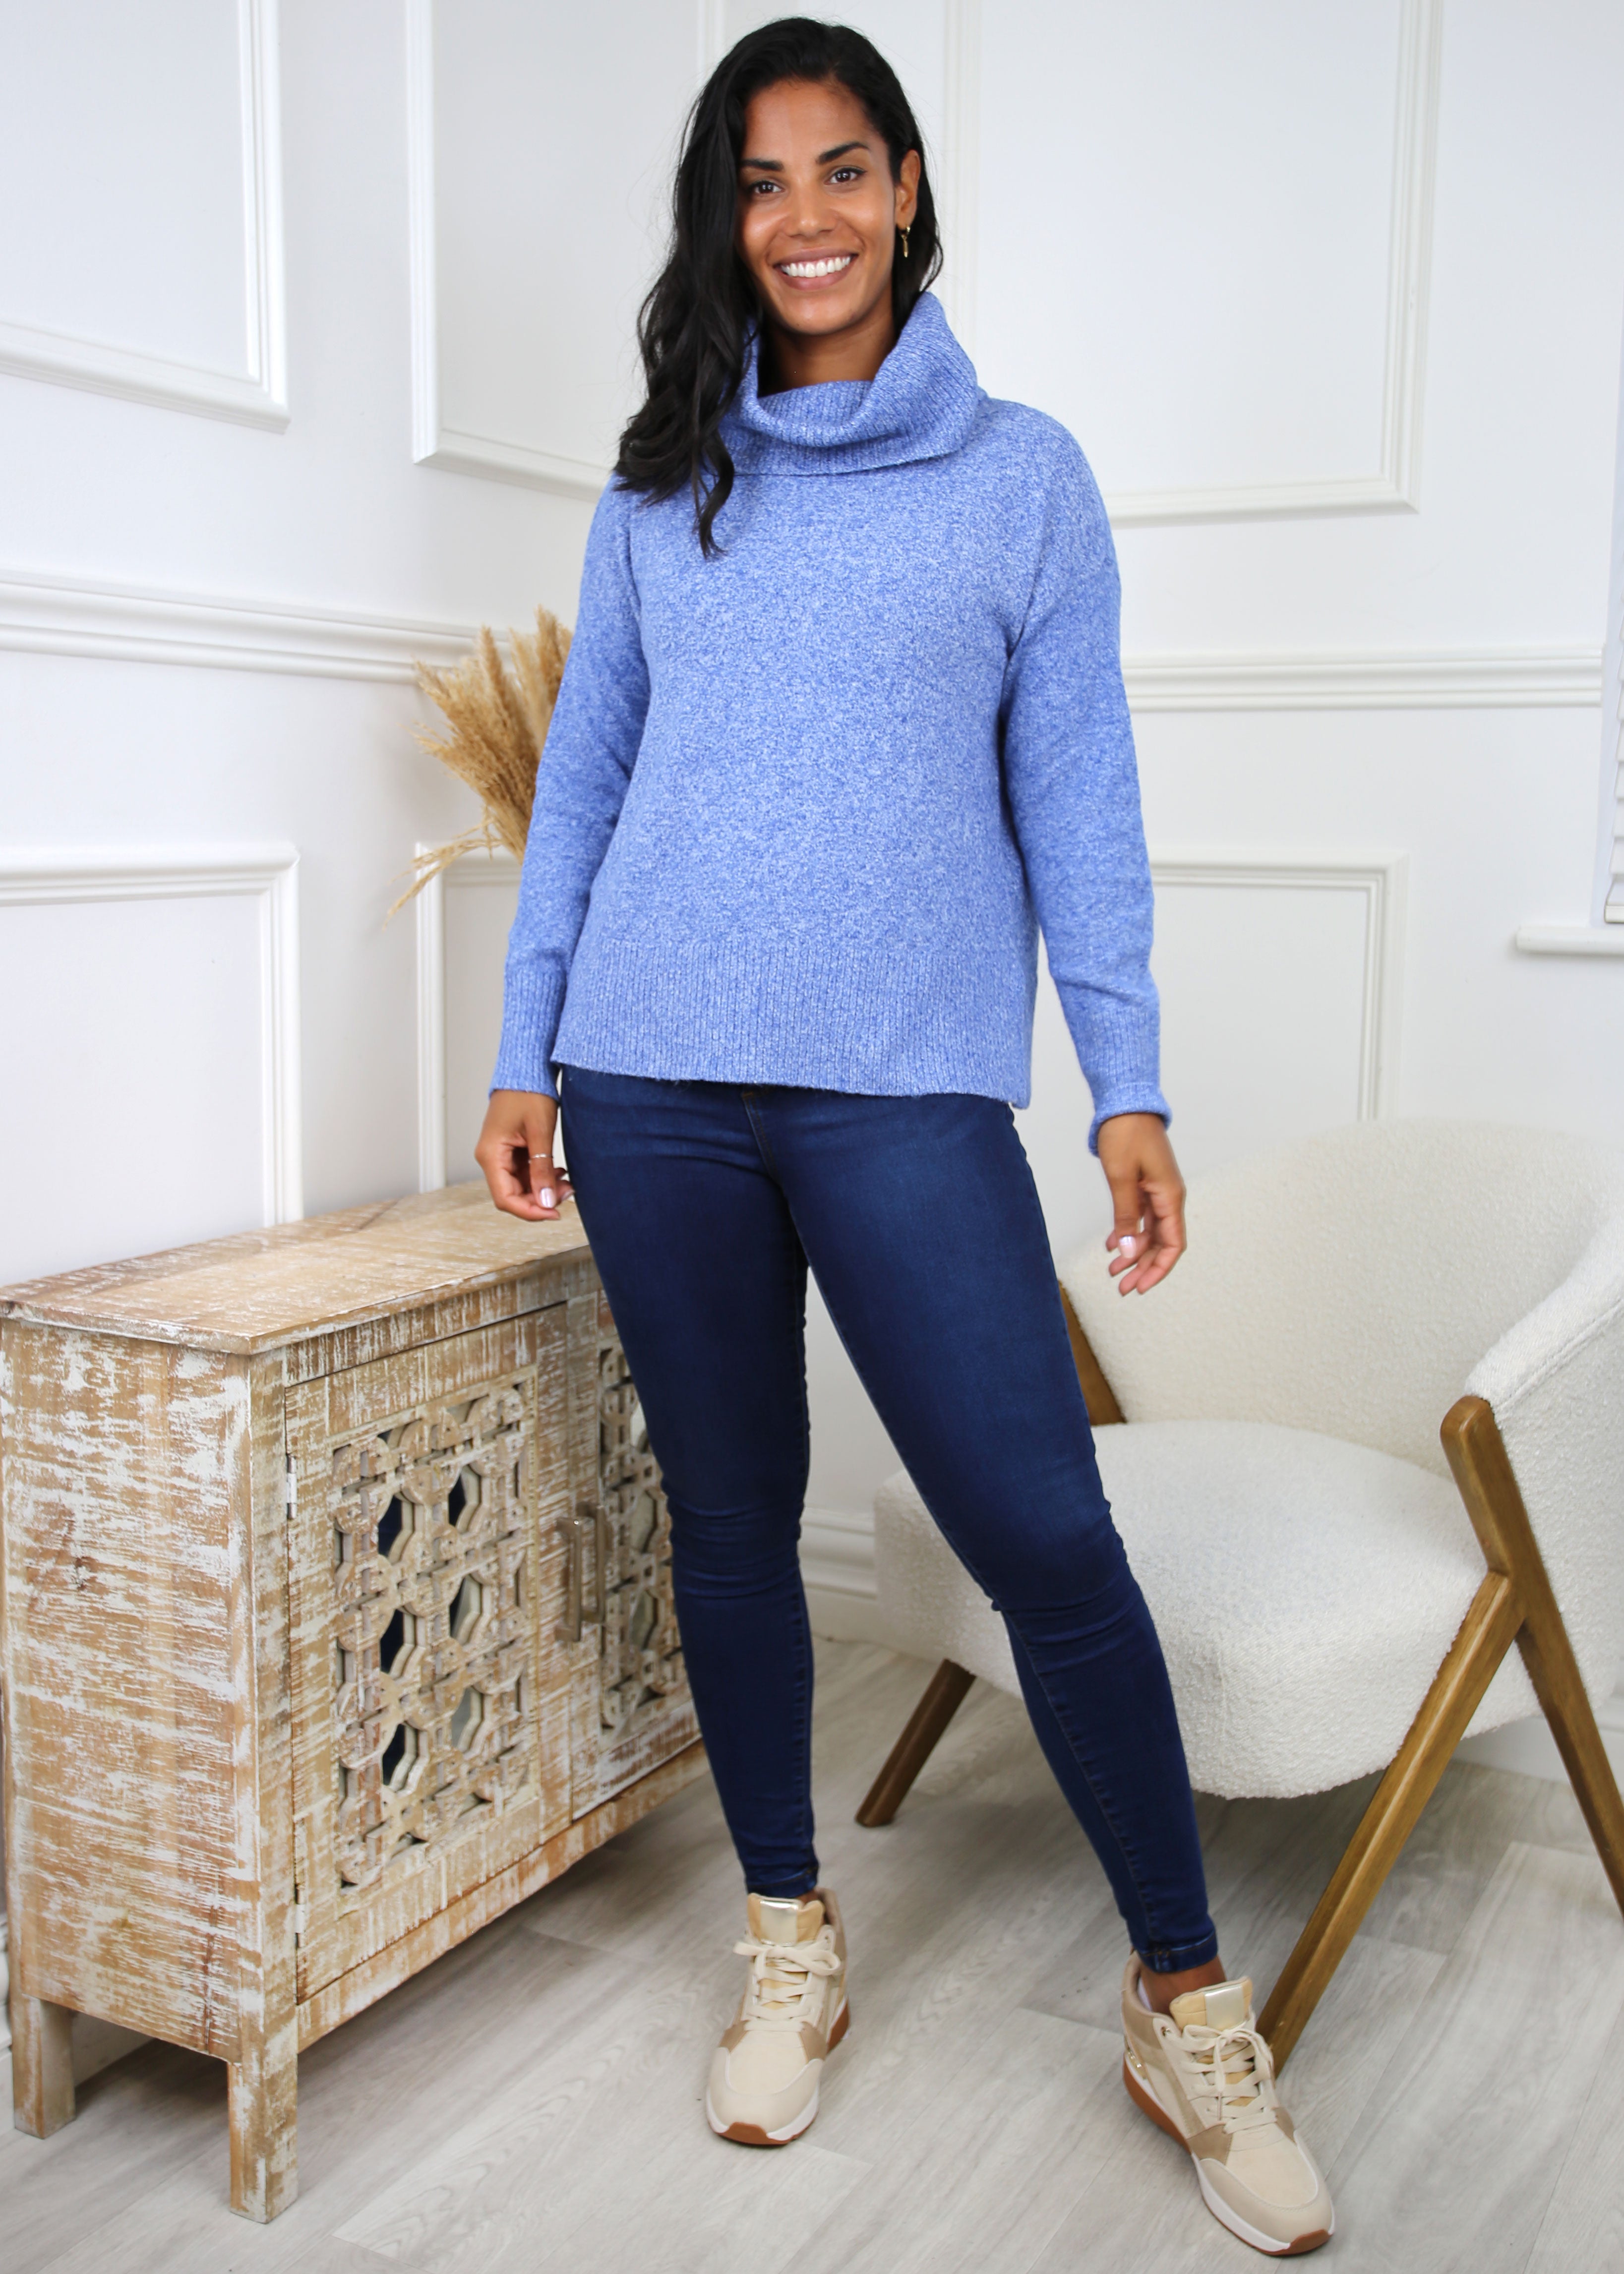 Doffy Beaucoup Blue Cowlneck Pullover